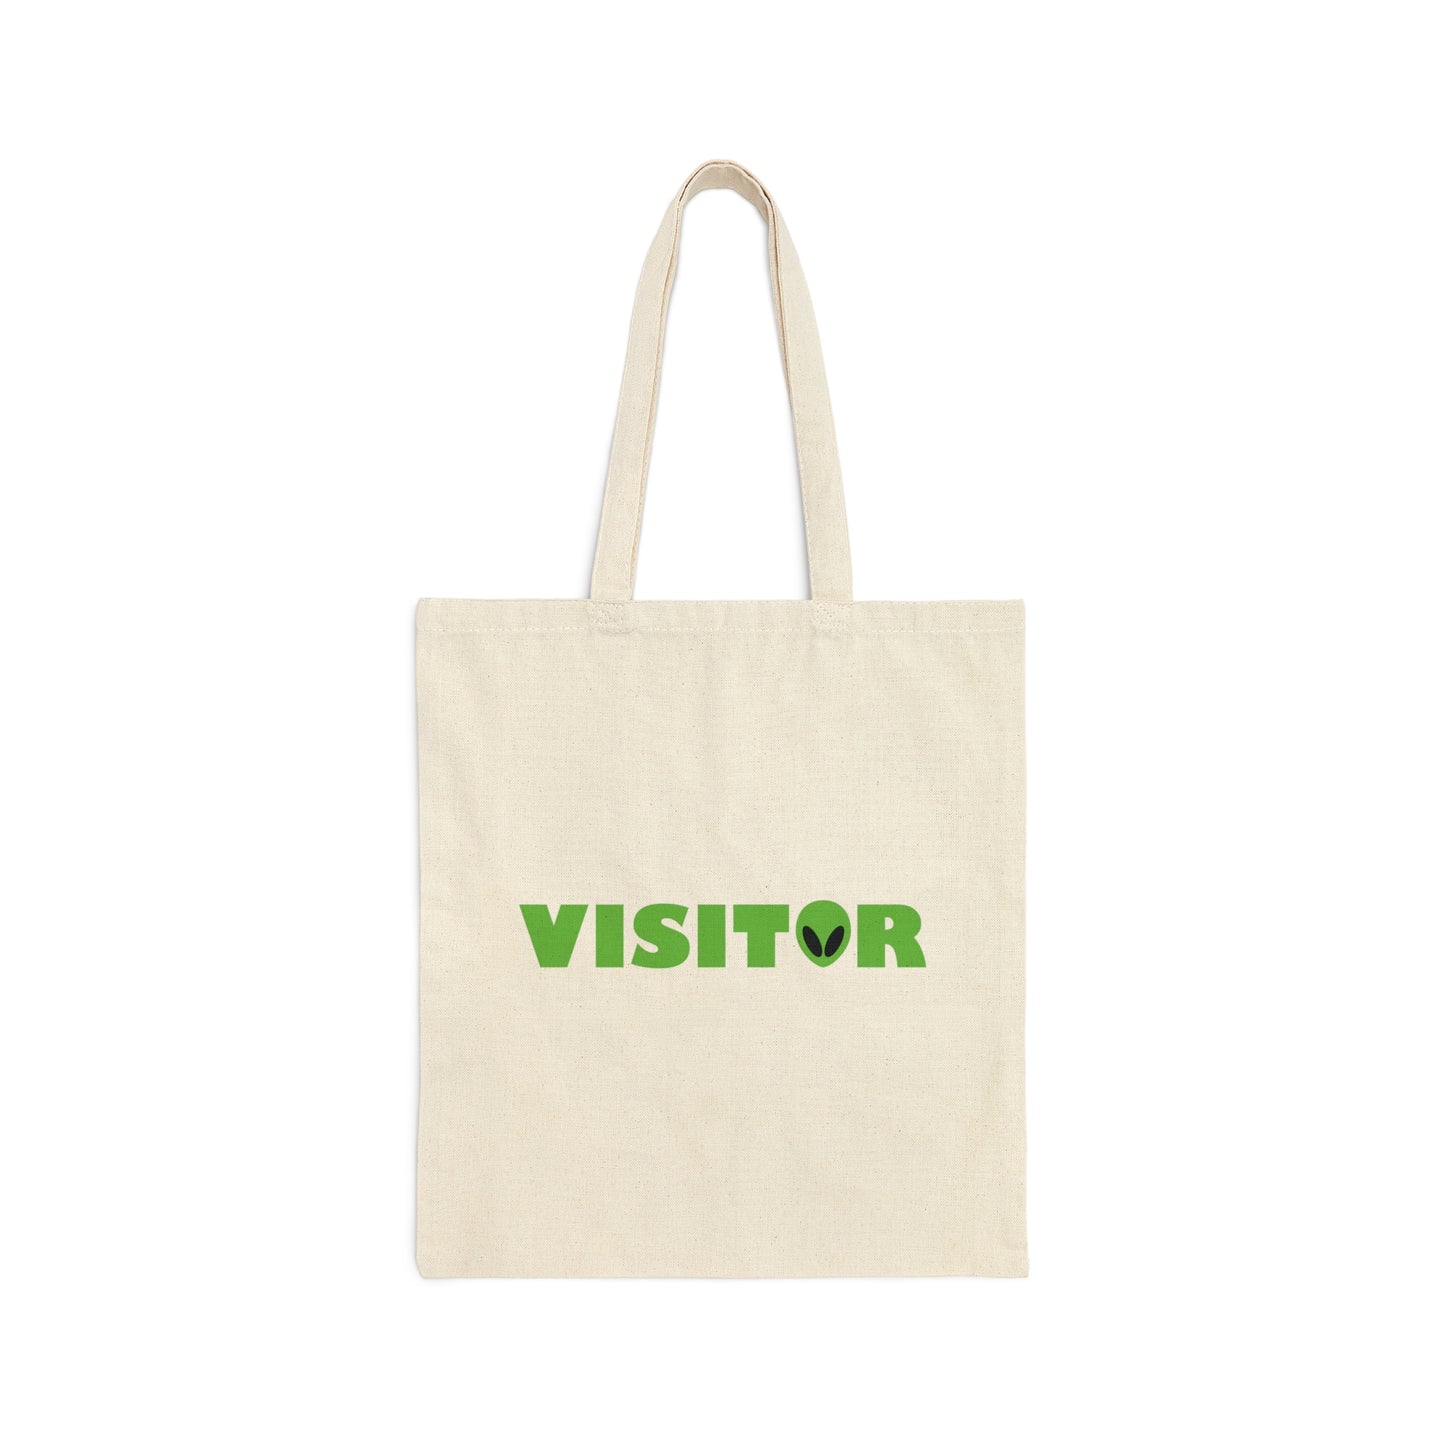 Visitor Aliens Arrival UFO TV Series Green People Canvas Shopping Cotton Tote Bag